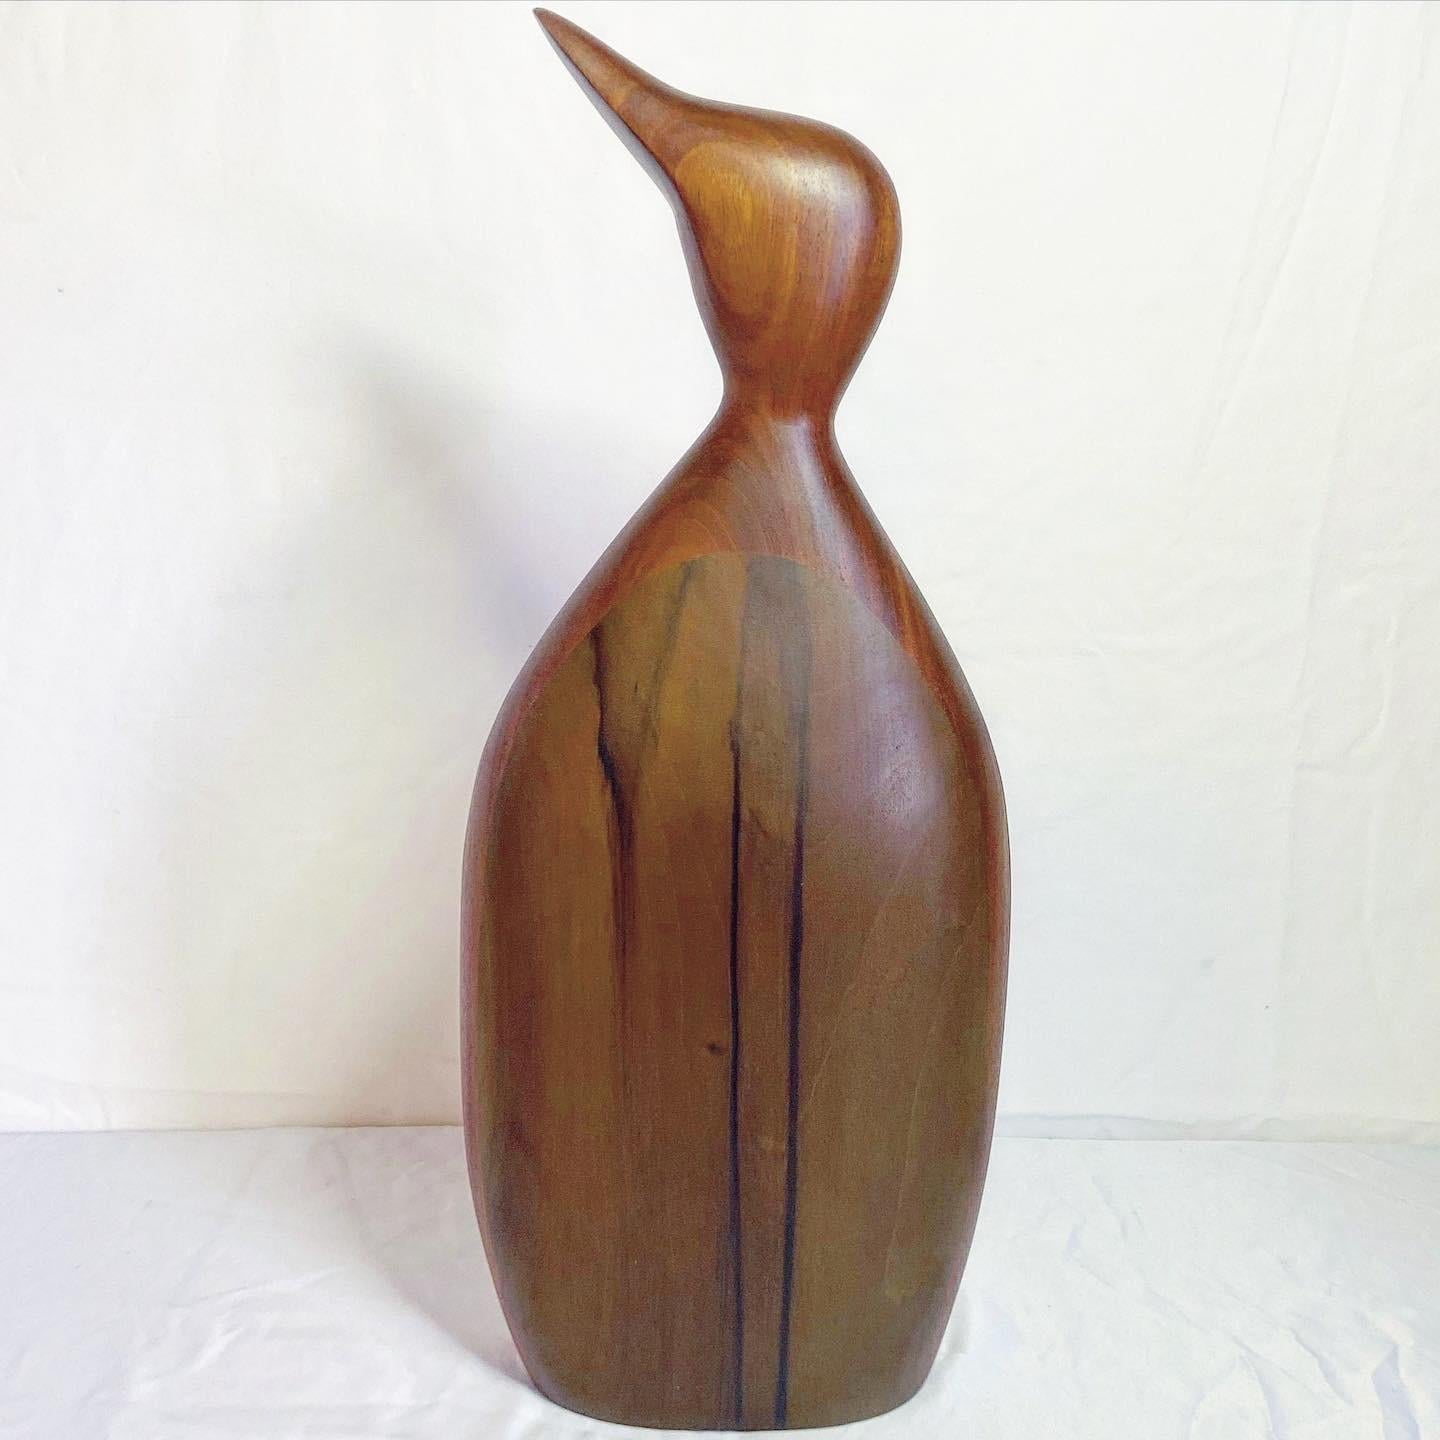 Paul LaMontagne is an American, 20th/21st Century Artist. This is a large carved wood sculpture depicting a standing bird. The base is signed on the underside Paul LaMontagne 1987.

Additional information:
Material: Wood
Color: Brown
Style: